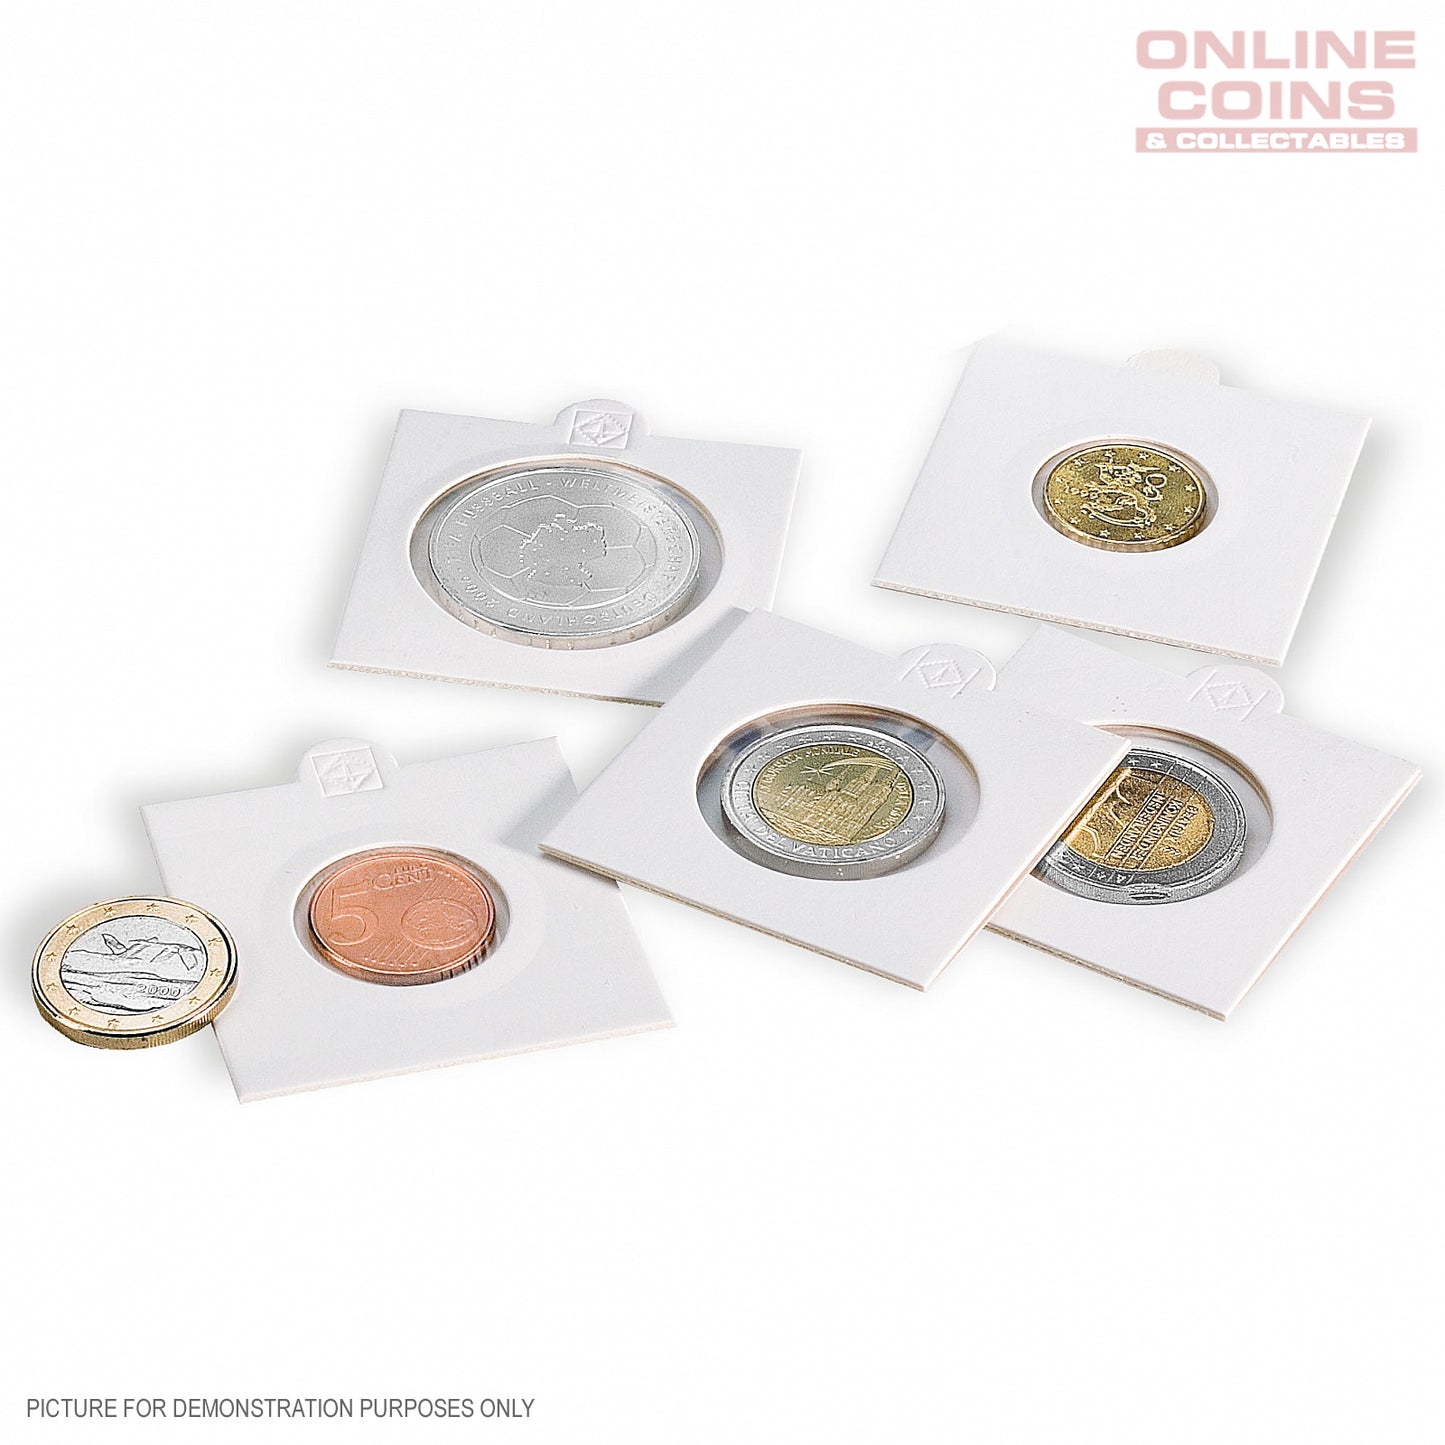 Lighthouse MATRIX WHITE 17.5mm Self Adhesive 2"x2" Coin Holders  (Suitable For Australian Threepence Coins)